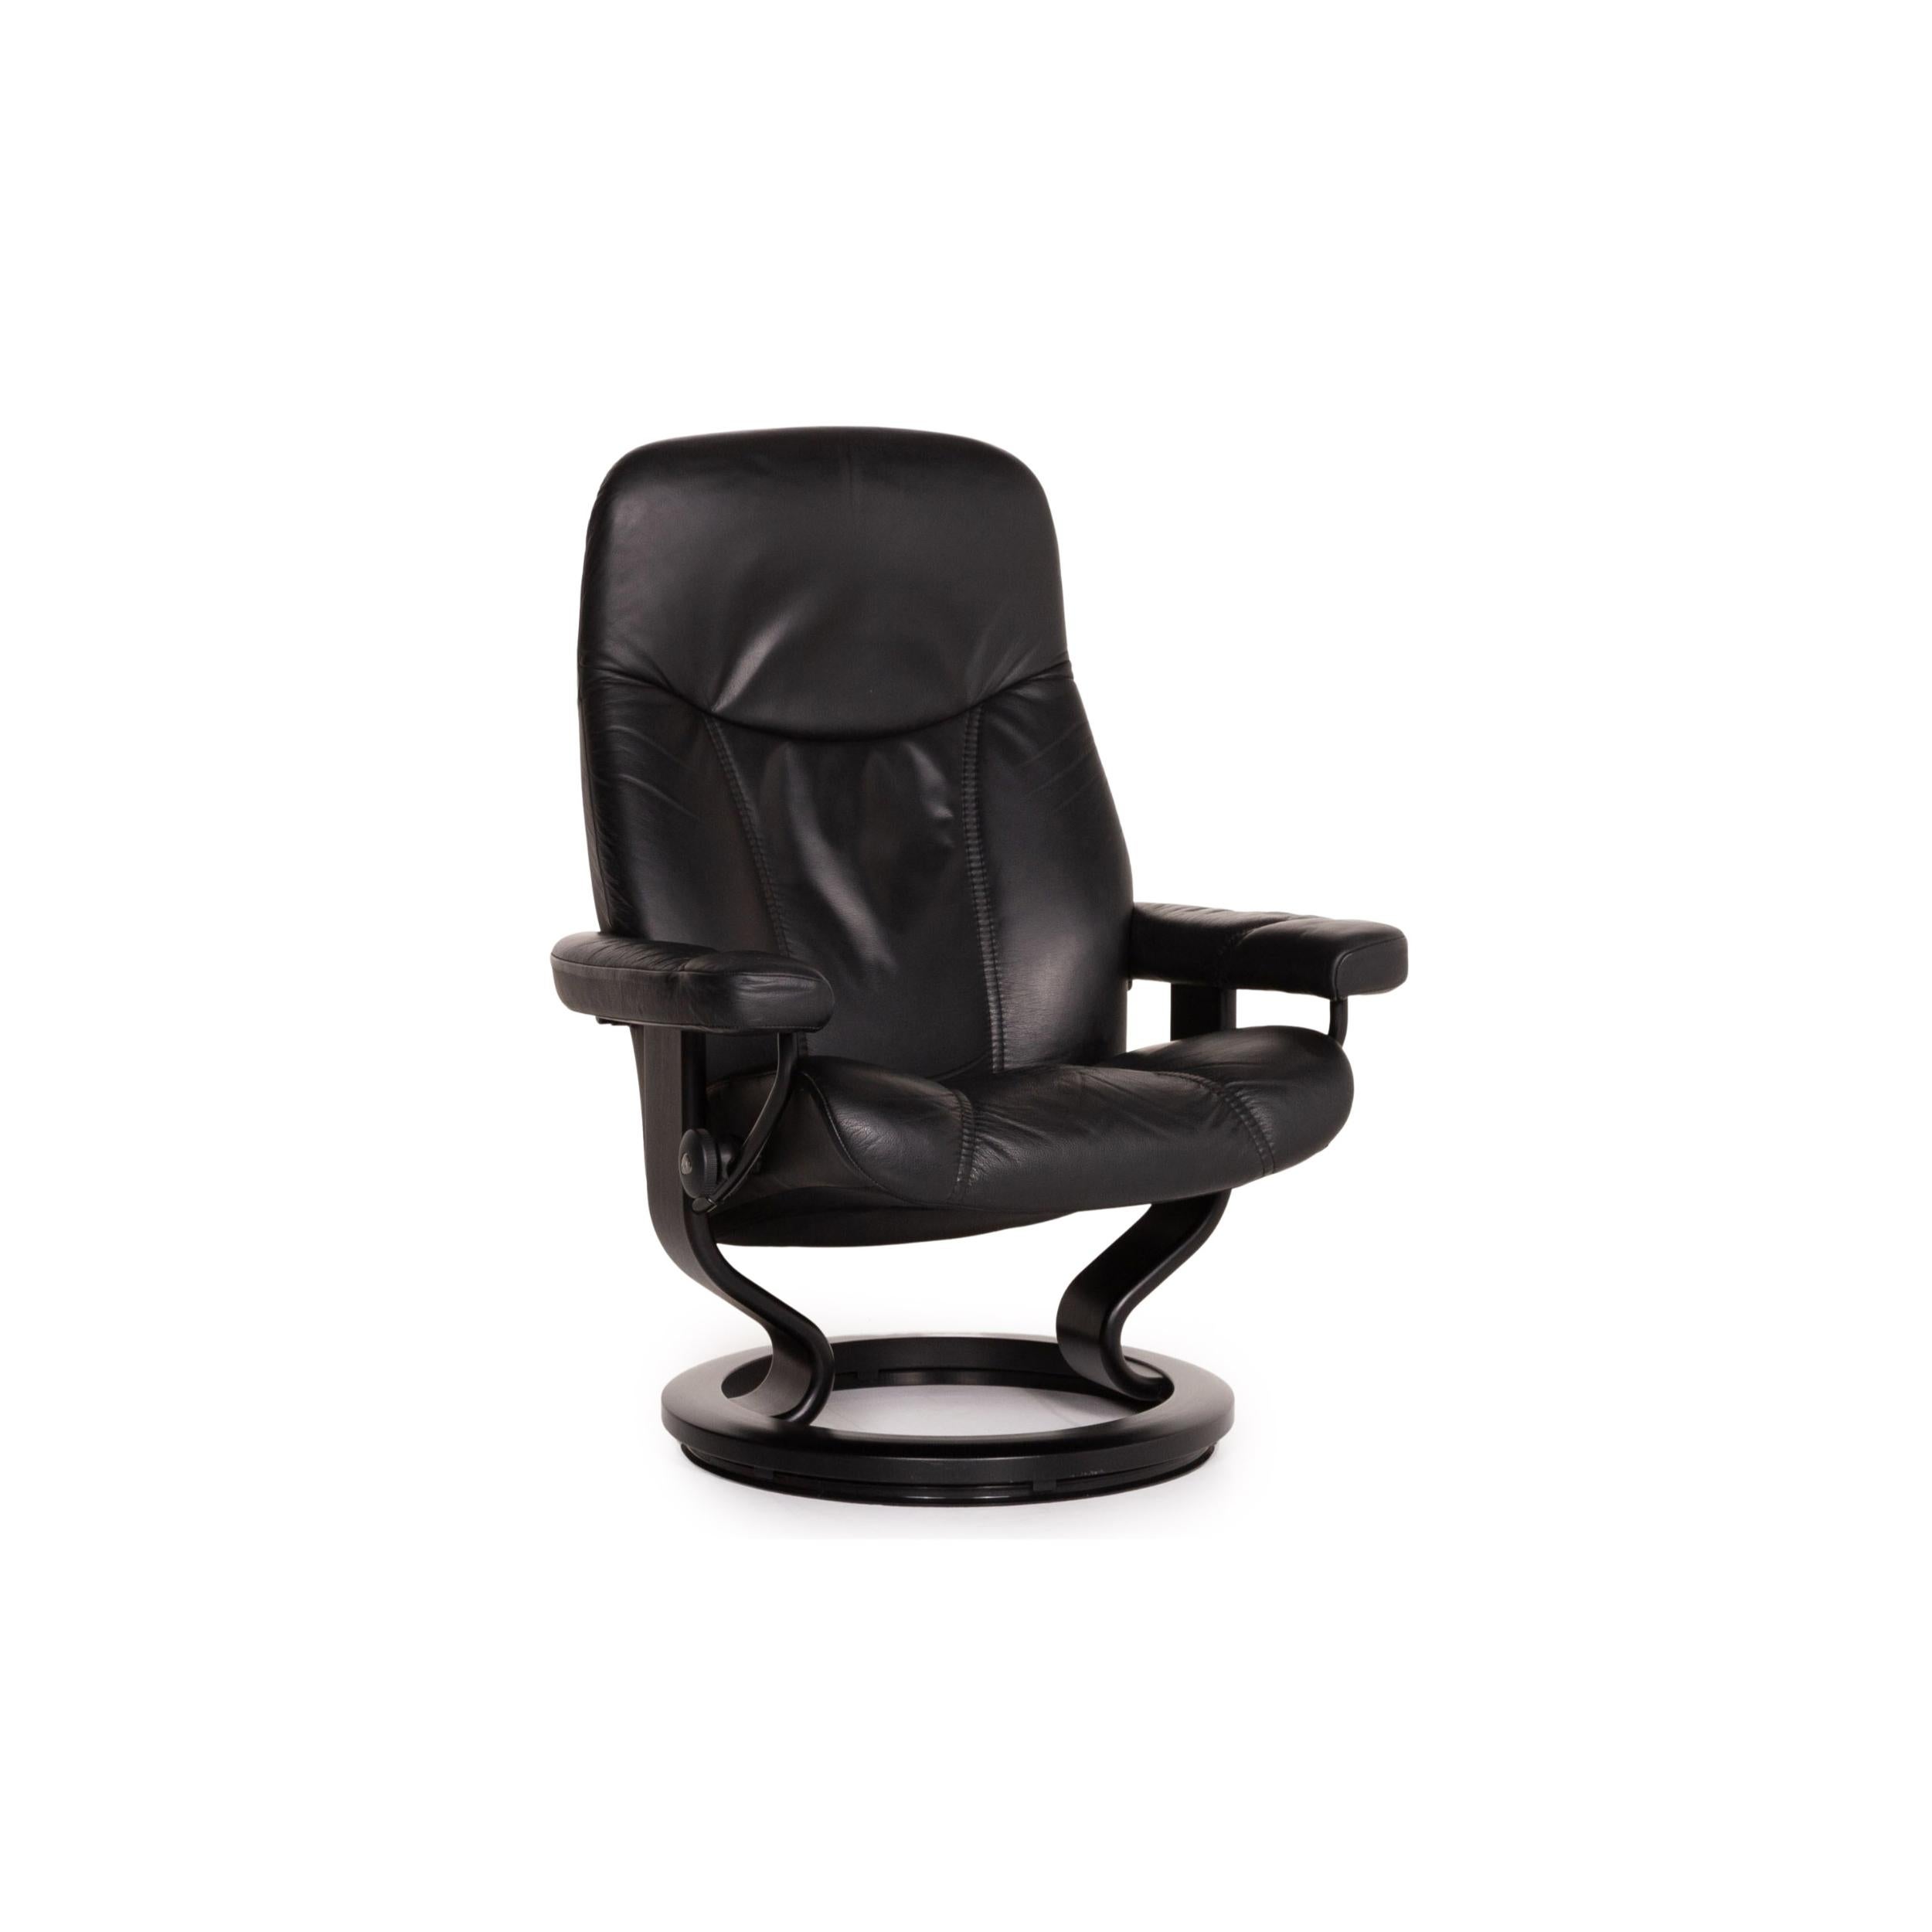 Stressless Consul Leather Armchair Incl. Stool Black Function Relaxation For Sale 4